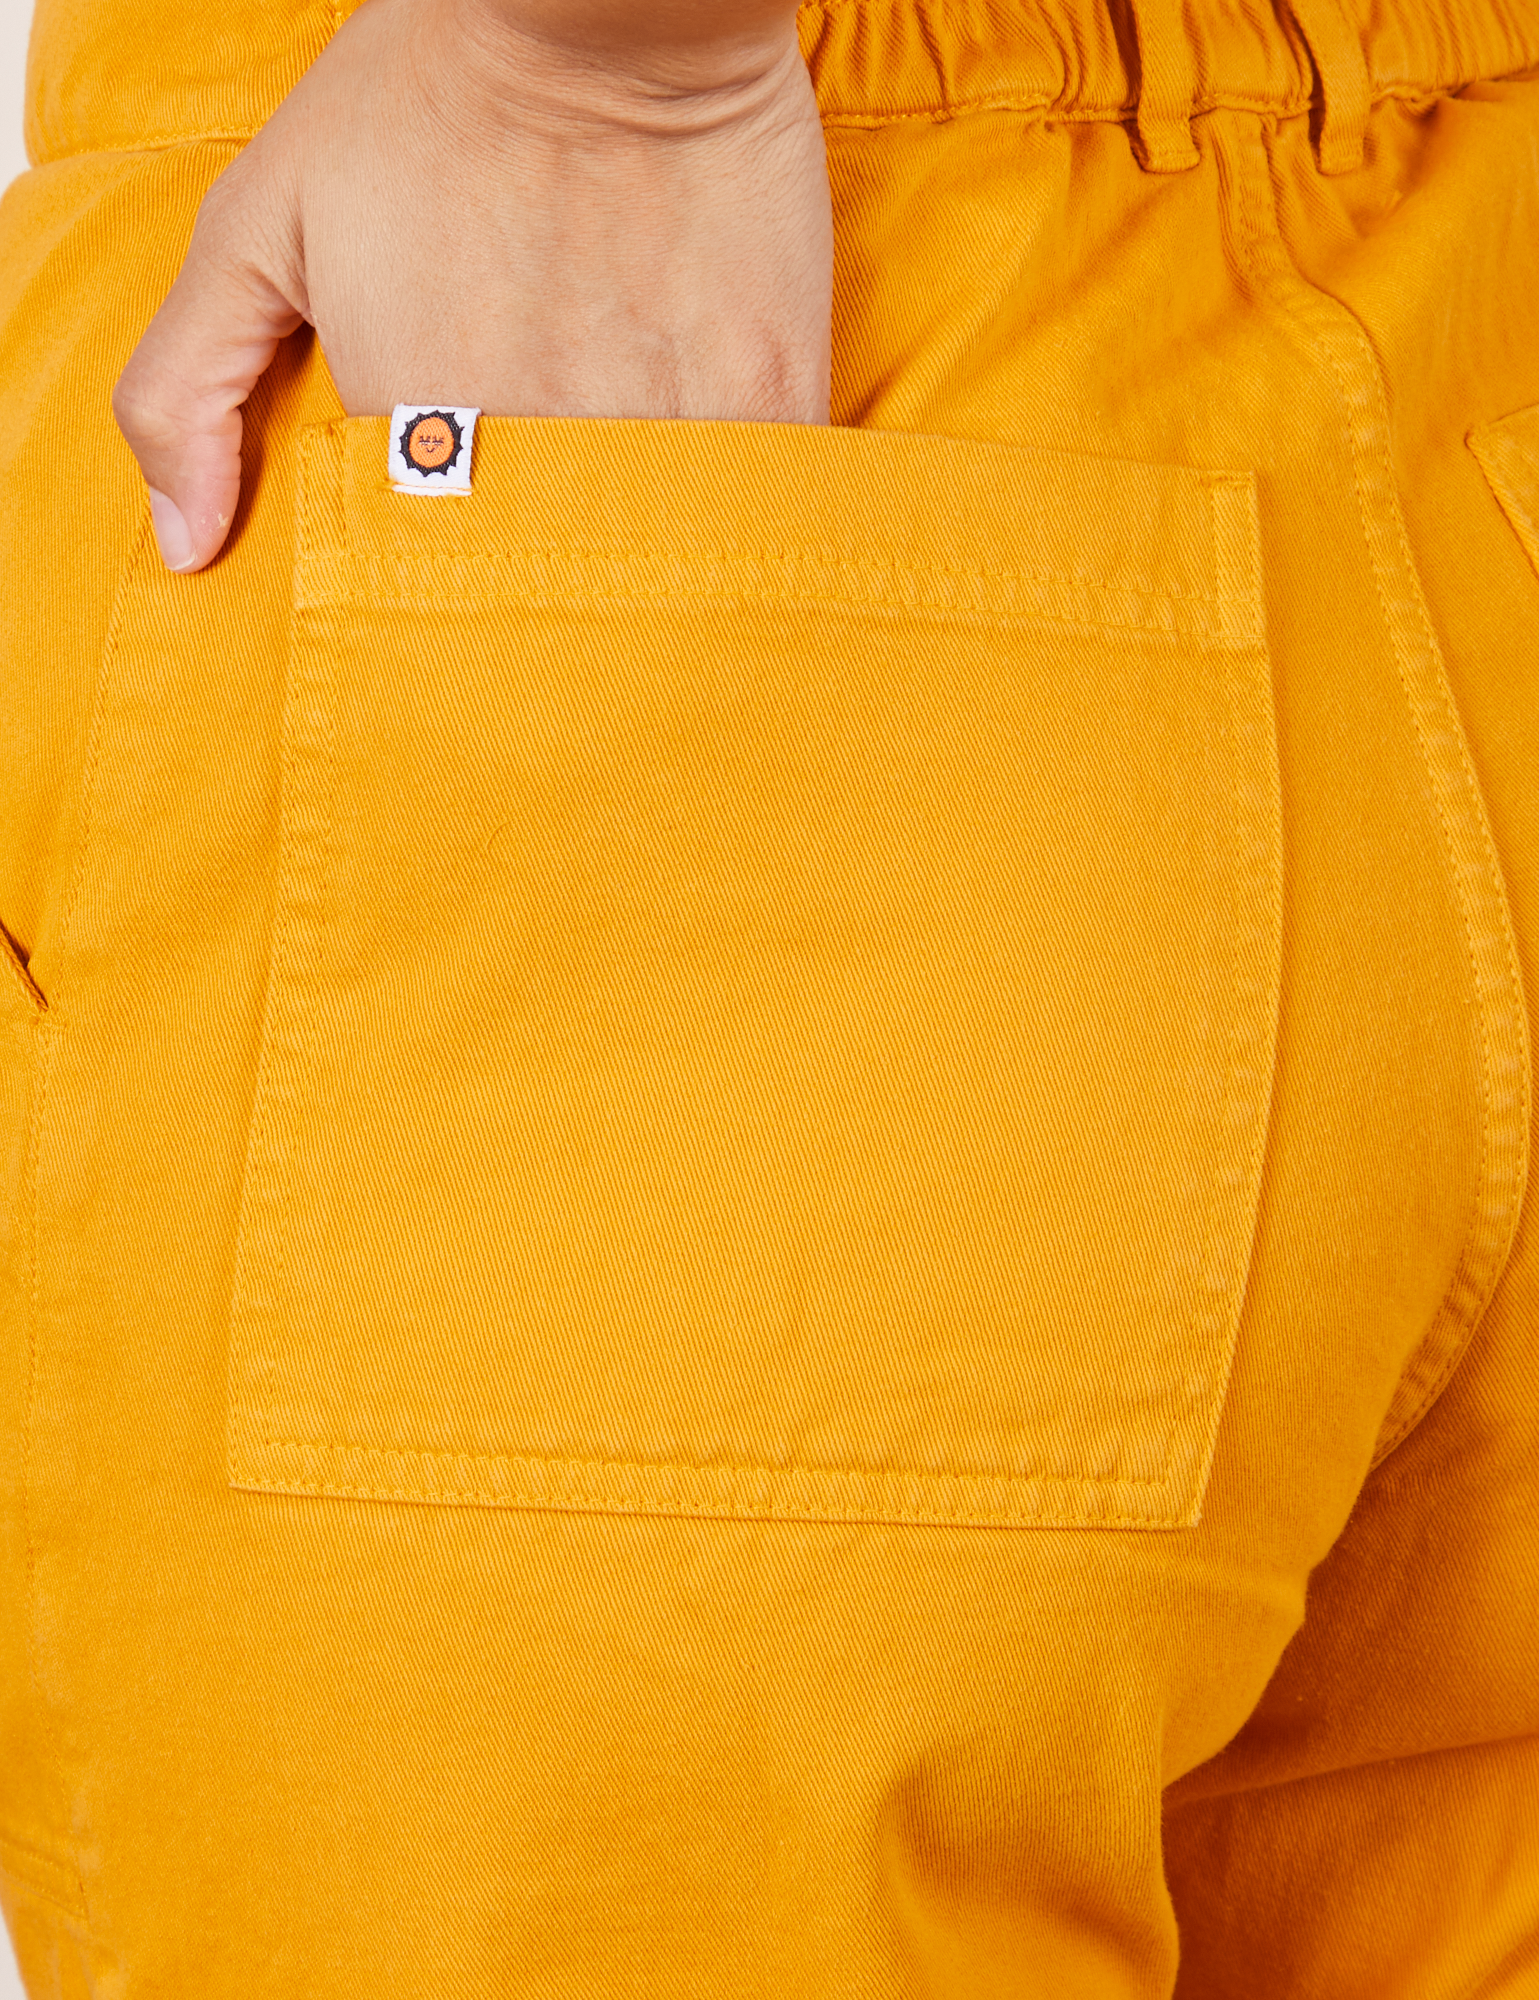 Back pocket close up of Short Sleeve Jumpsuit in Mustard Yellow. Tiara has her hand in the pocket.